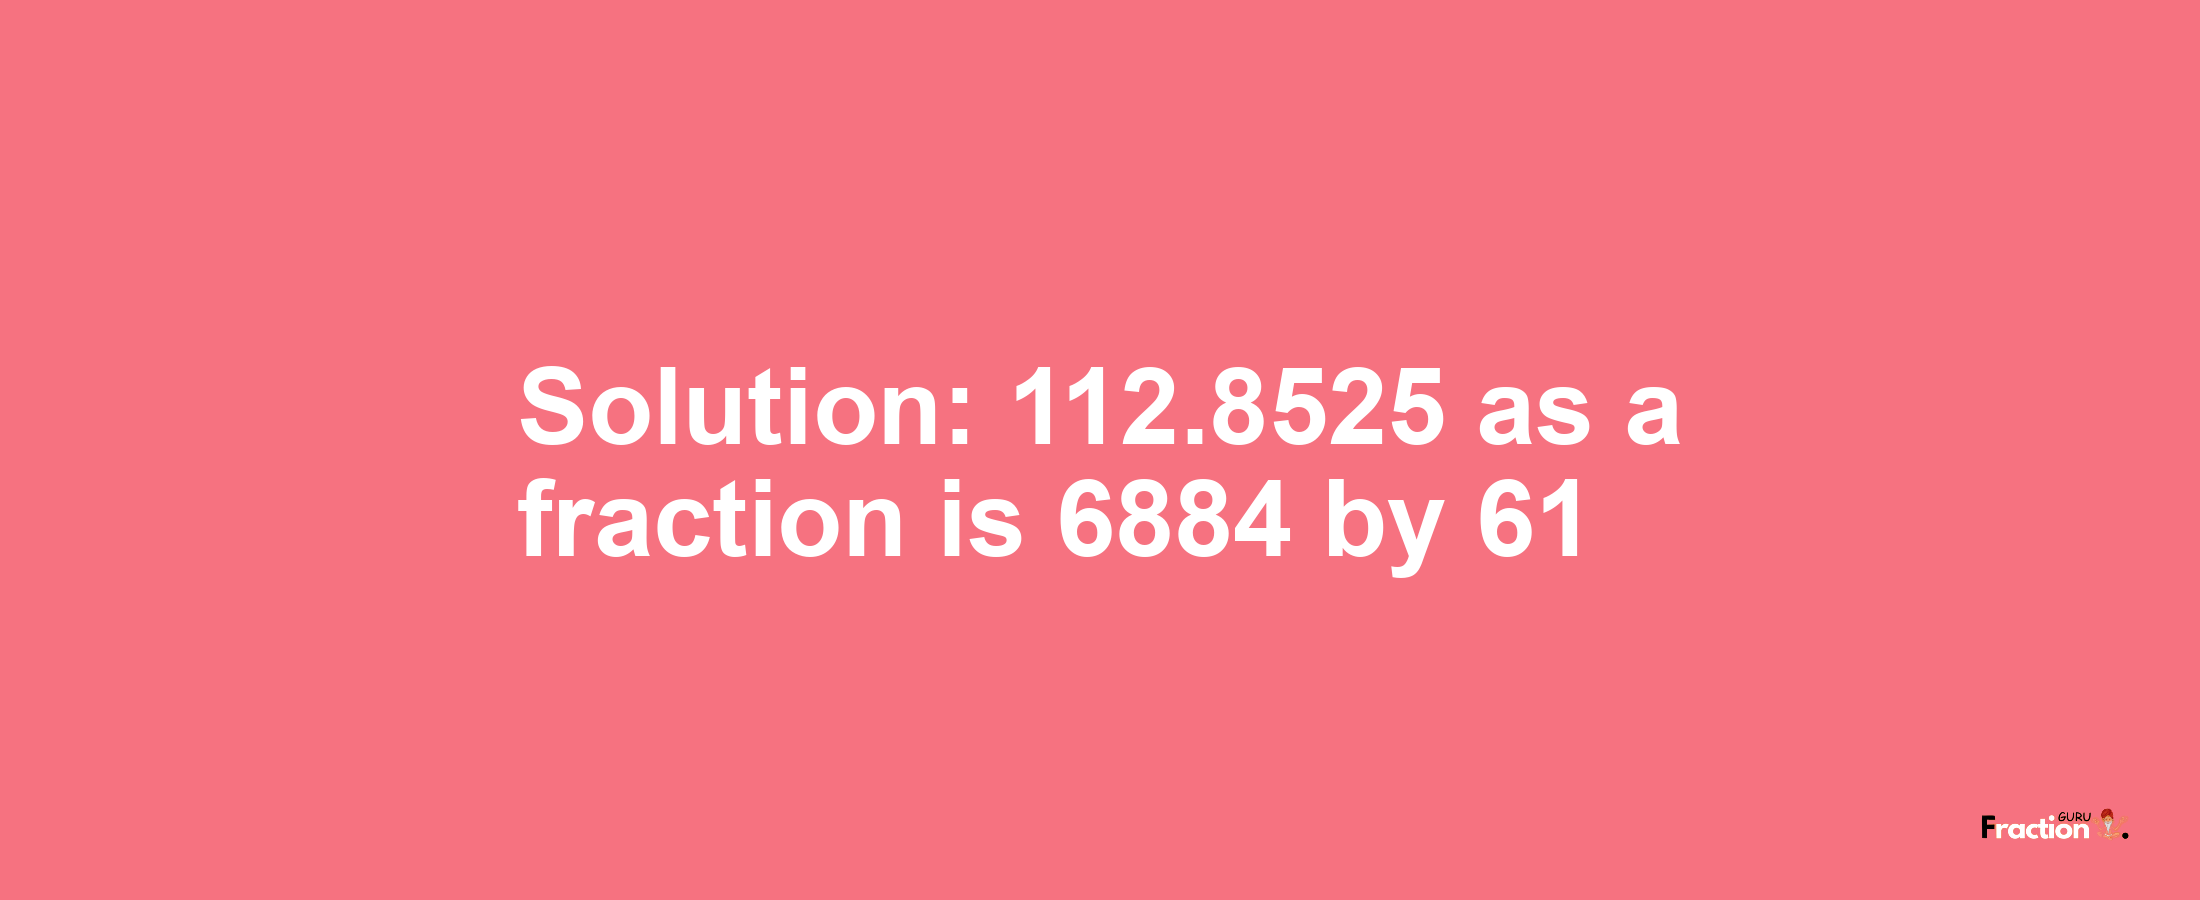 Solution:112.8525 as a fraction is 6884/61